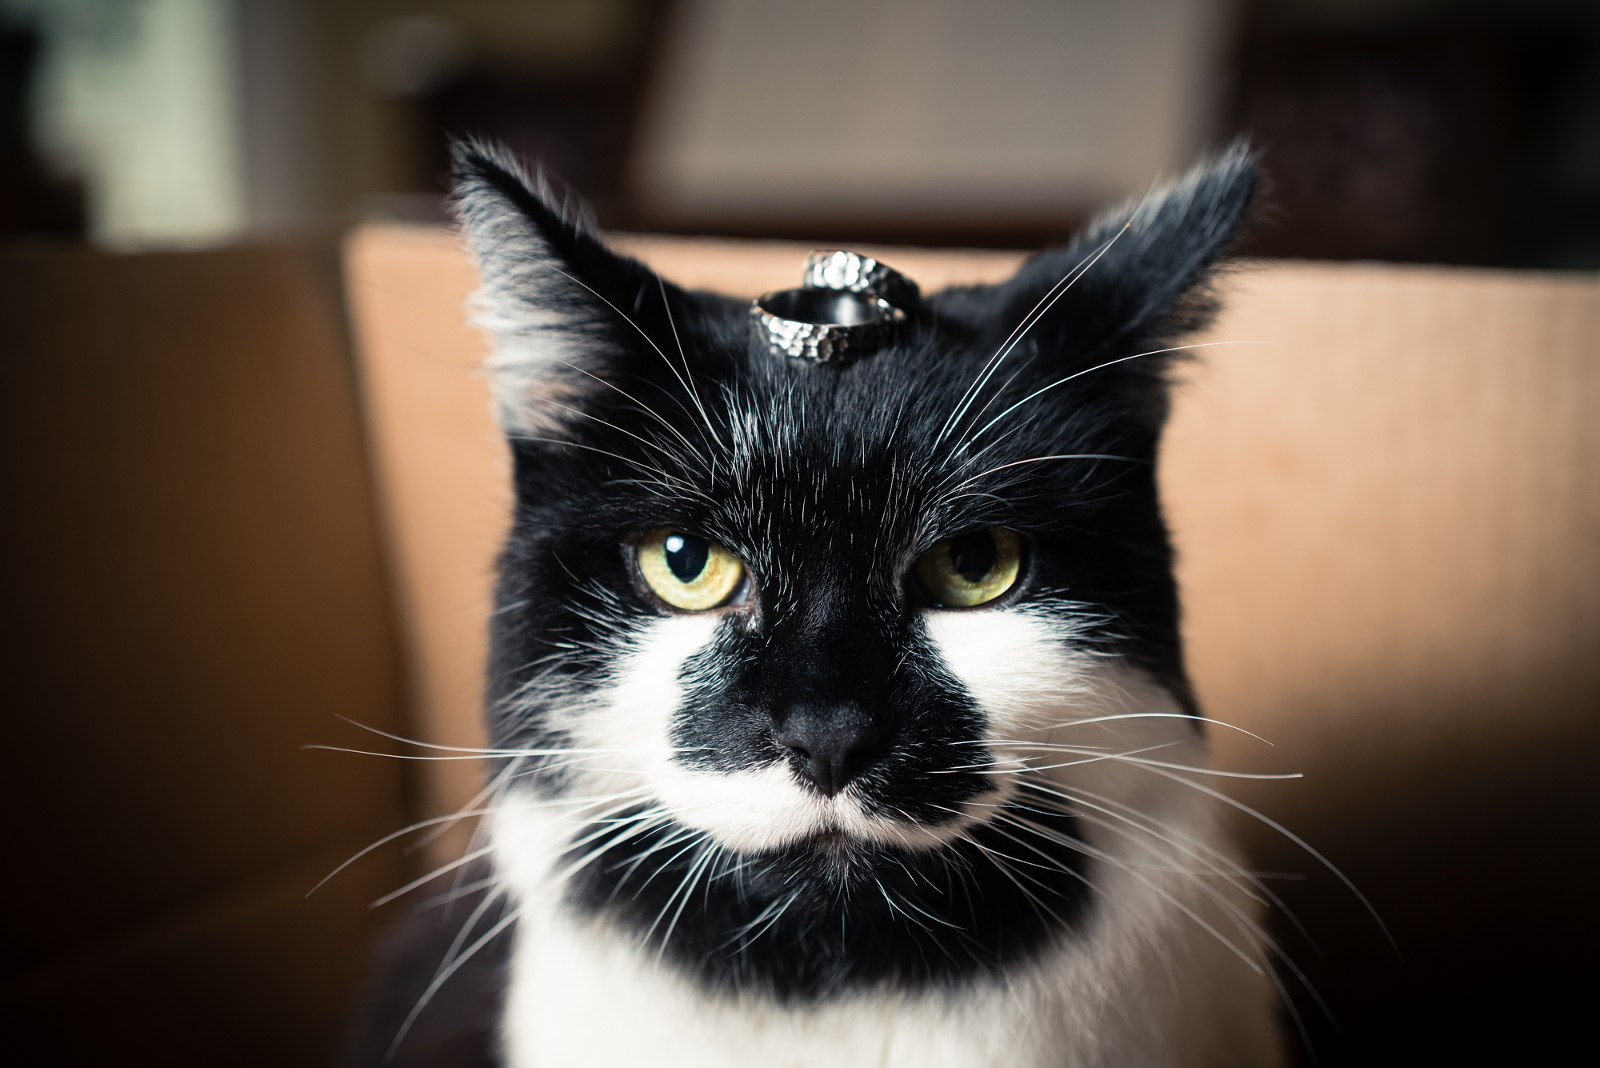 Cat with wedding rings